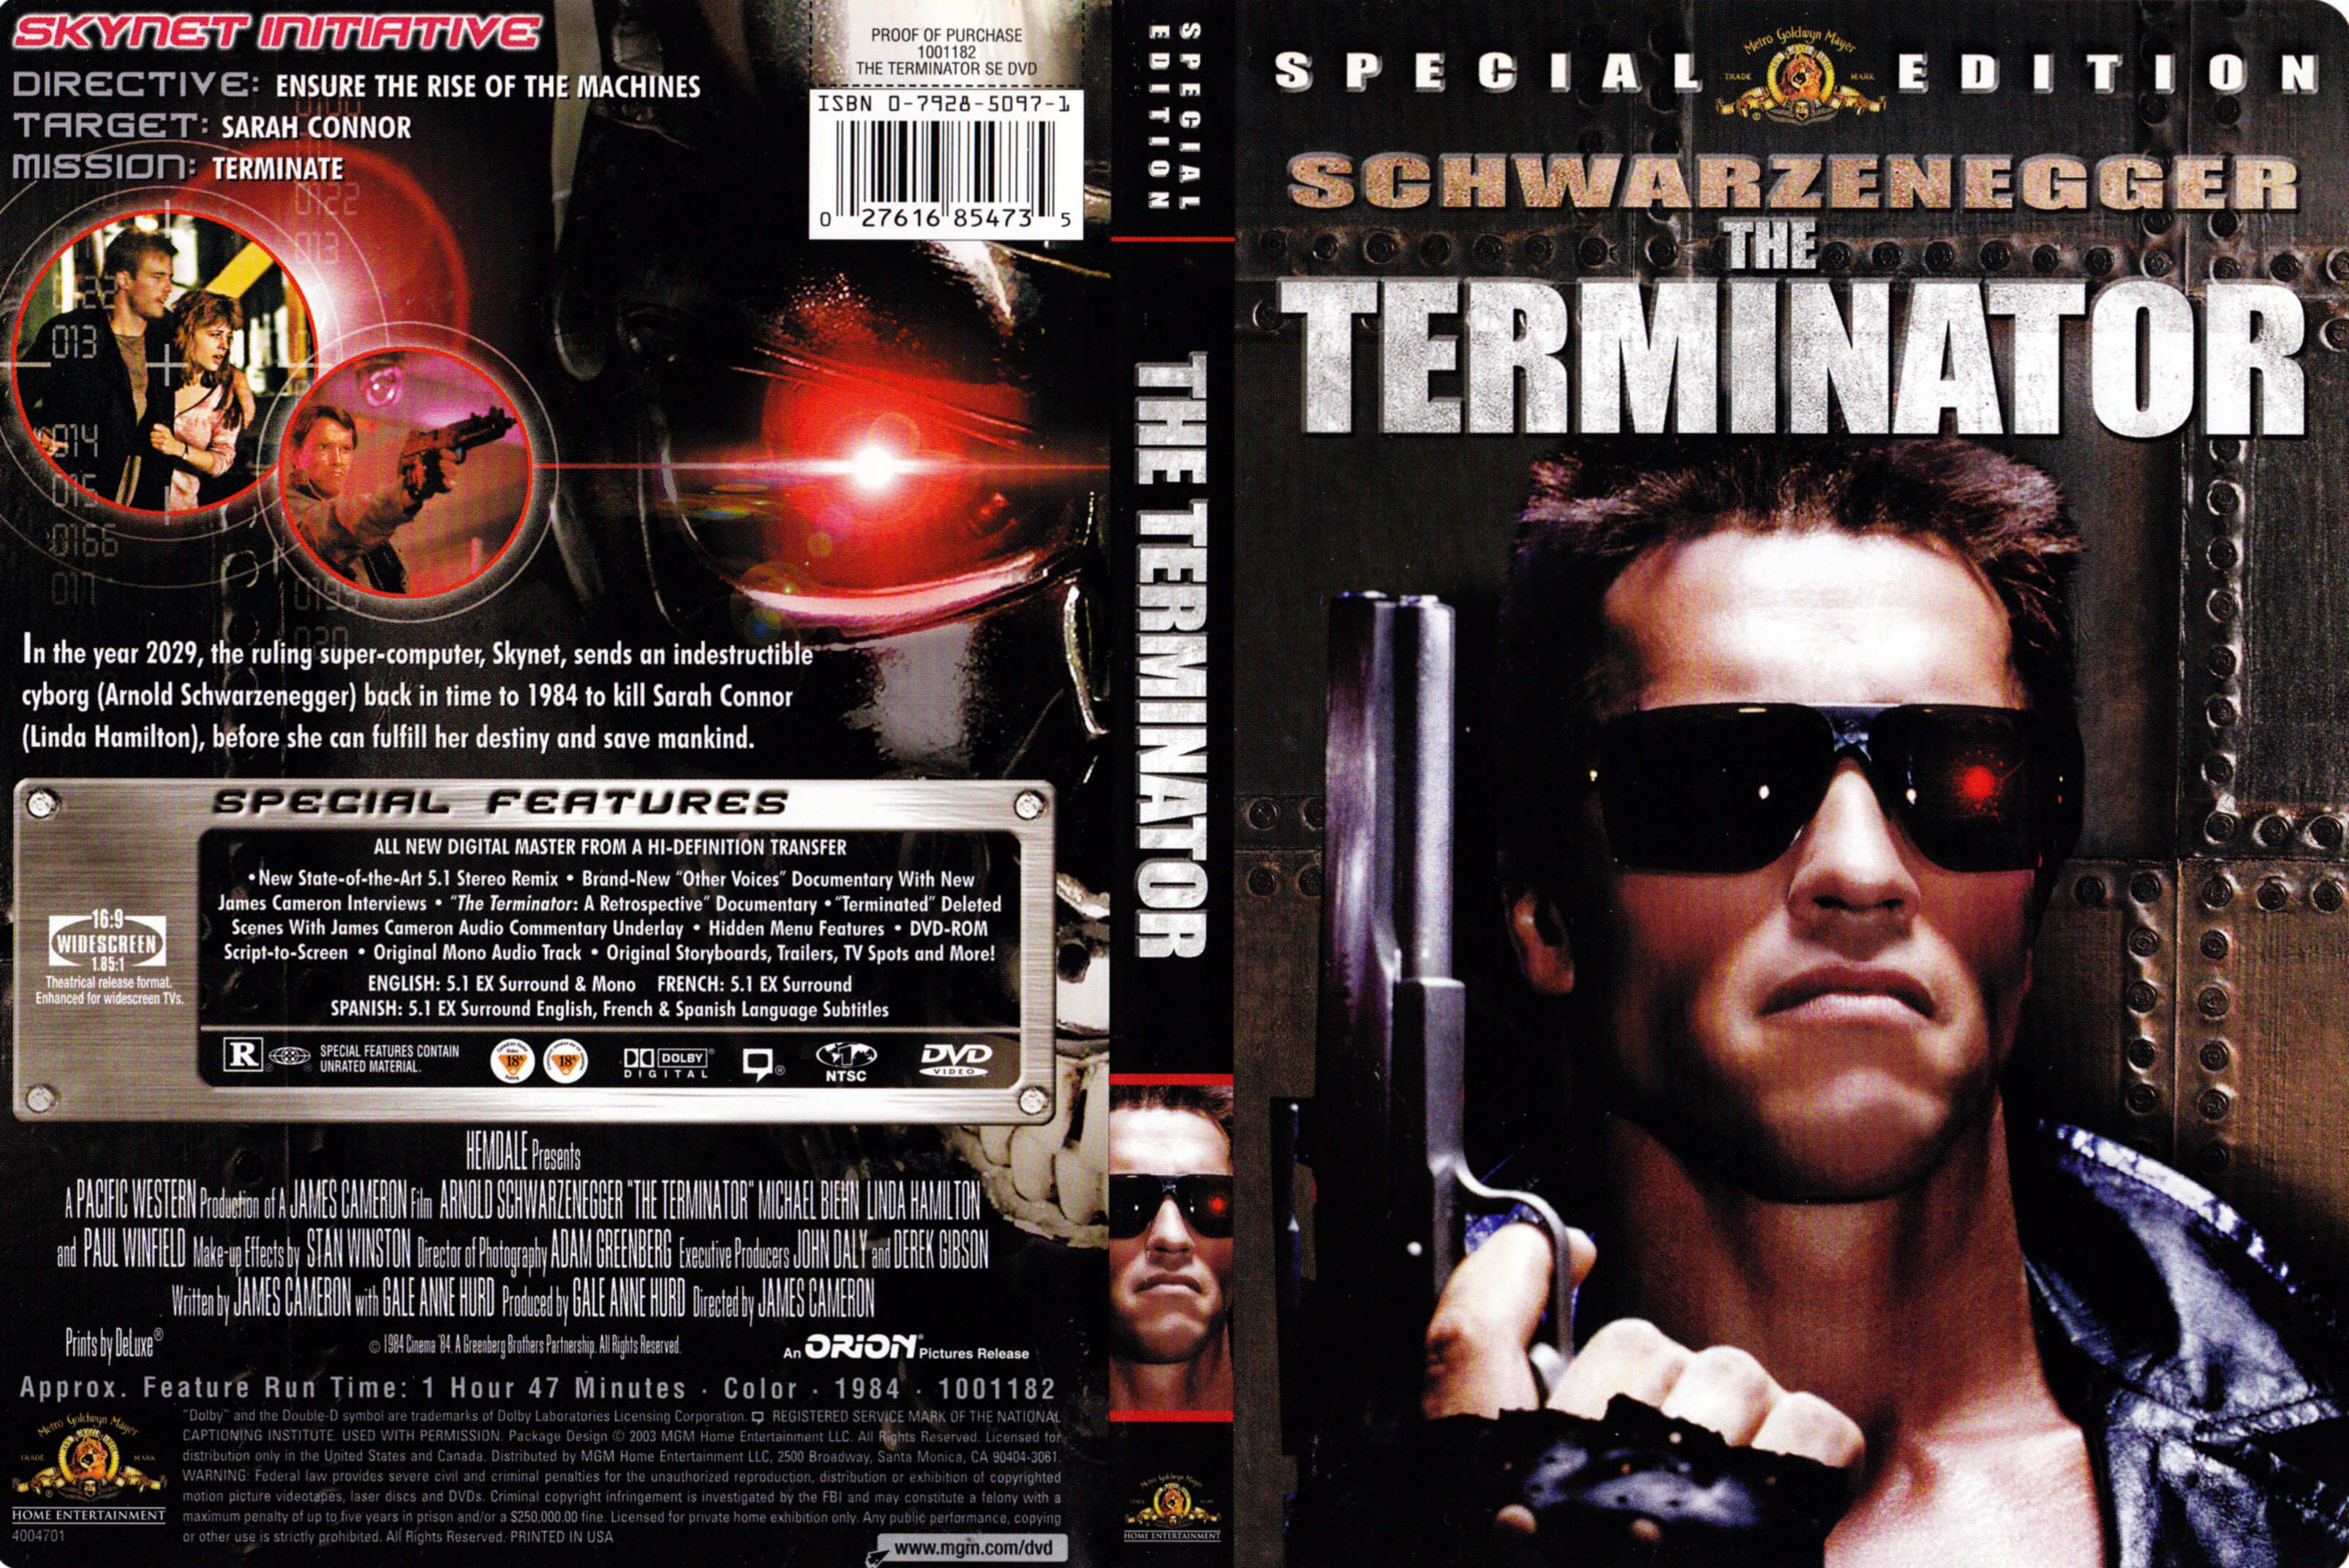 Jaquette DVD The terminator (Canadienne)